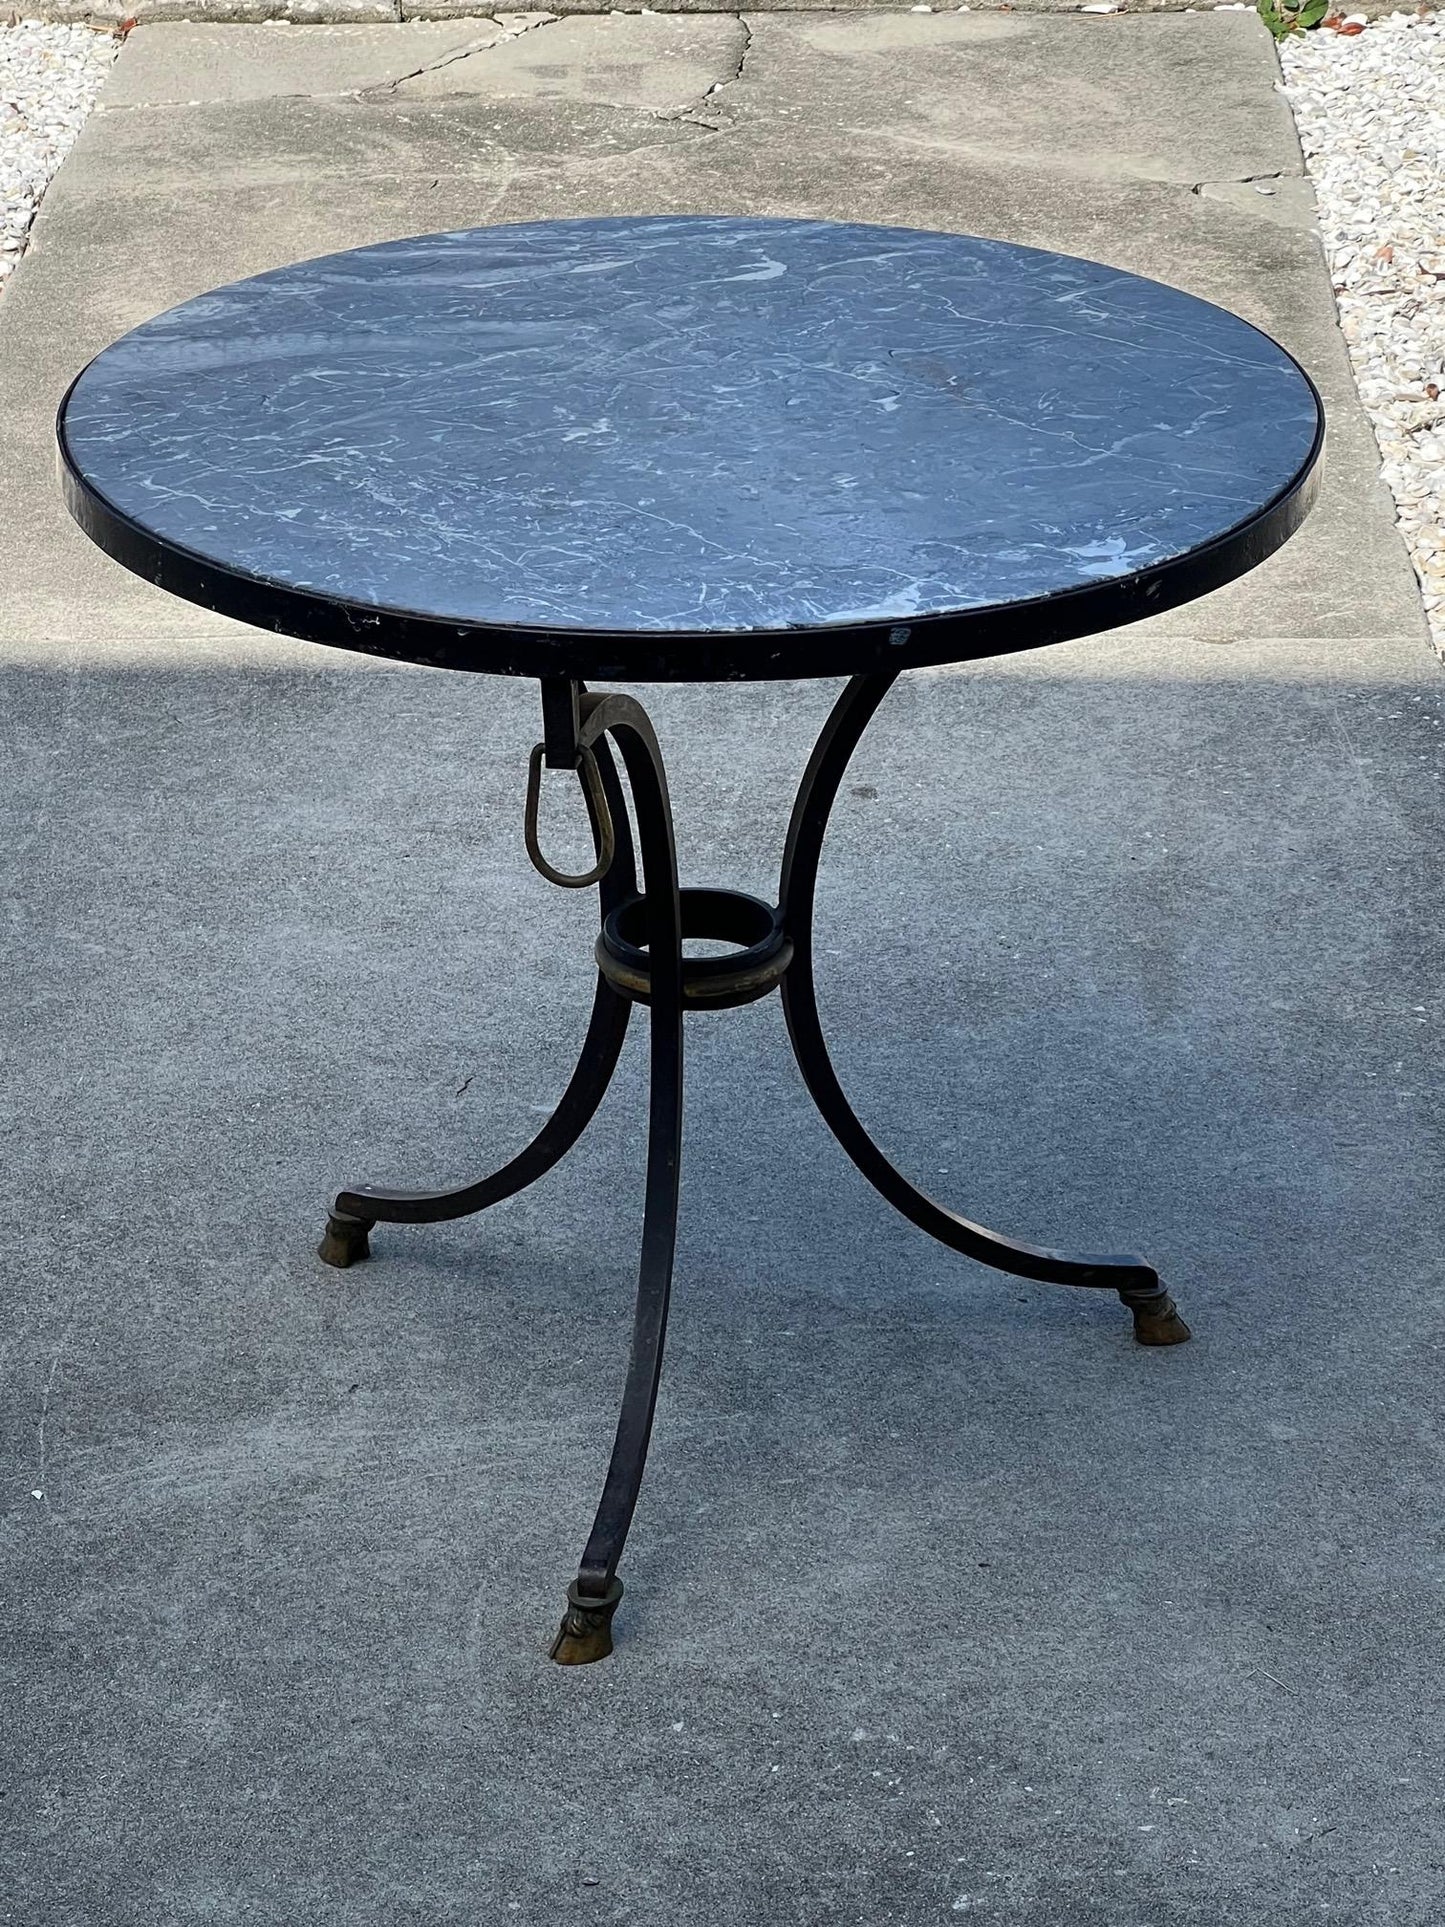 A Classic Wrought Iron Gueridon By Yale Burge ca' 1950's